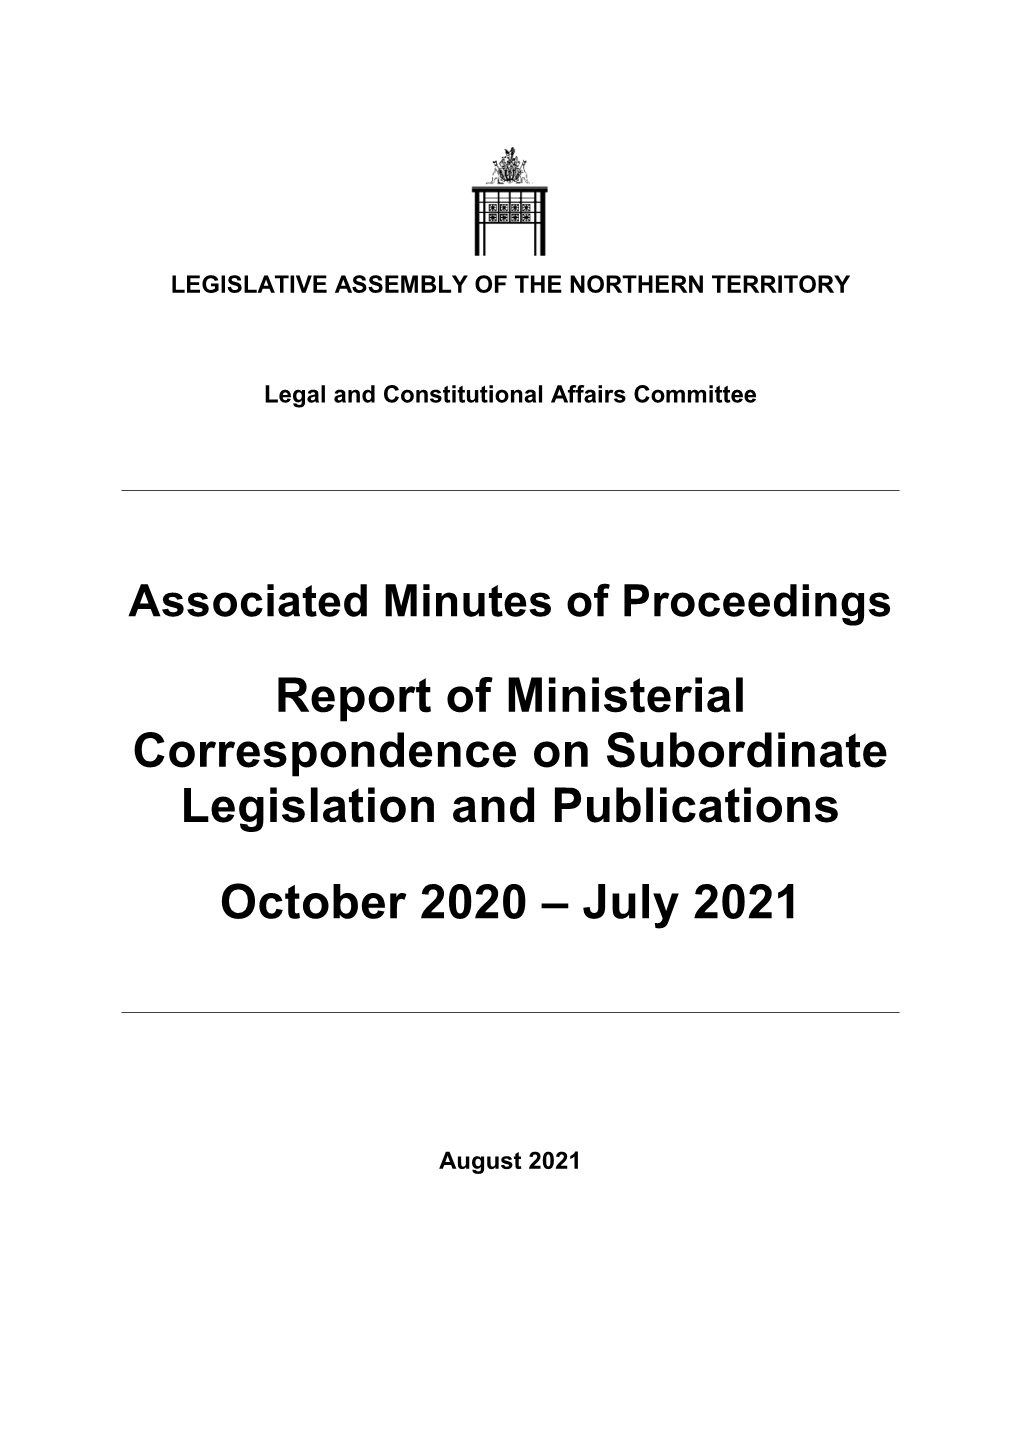 Report of Ministerial Correspondence on Subordinate Legislation and Publications